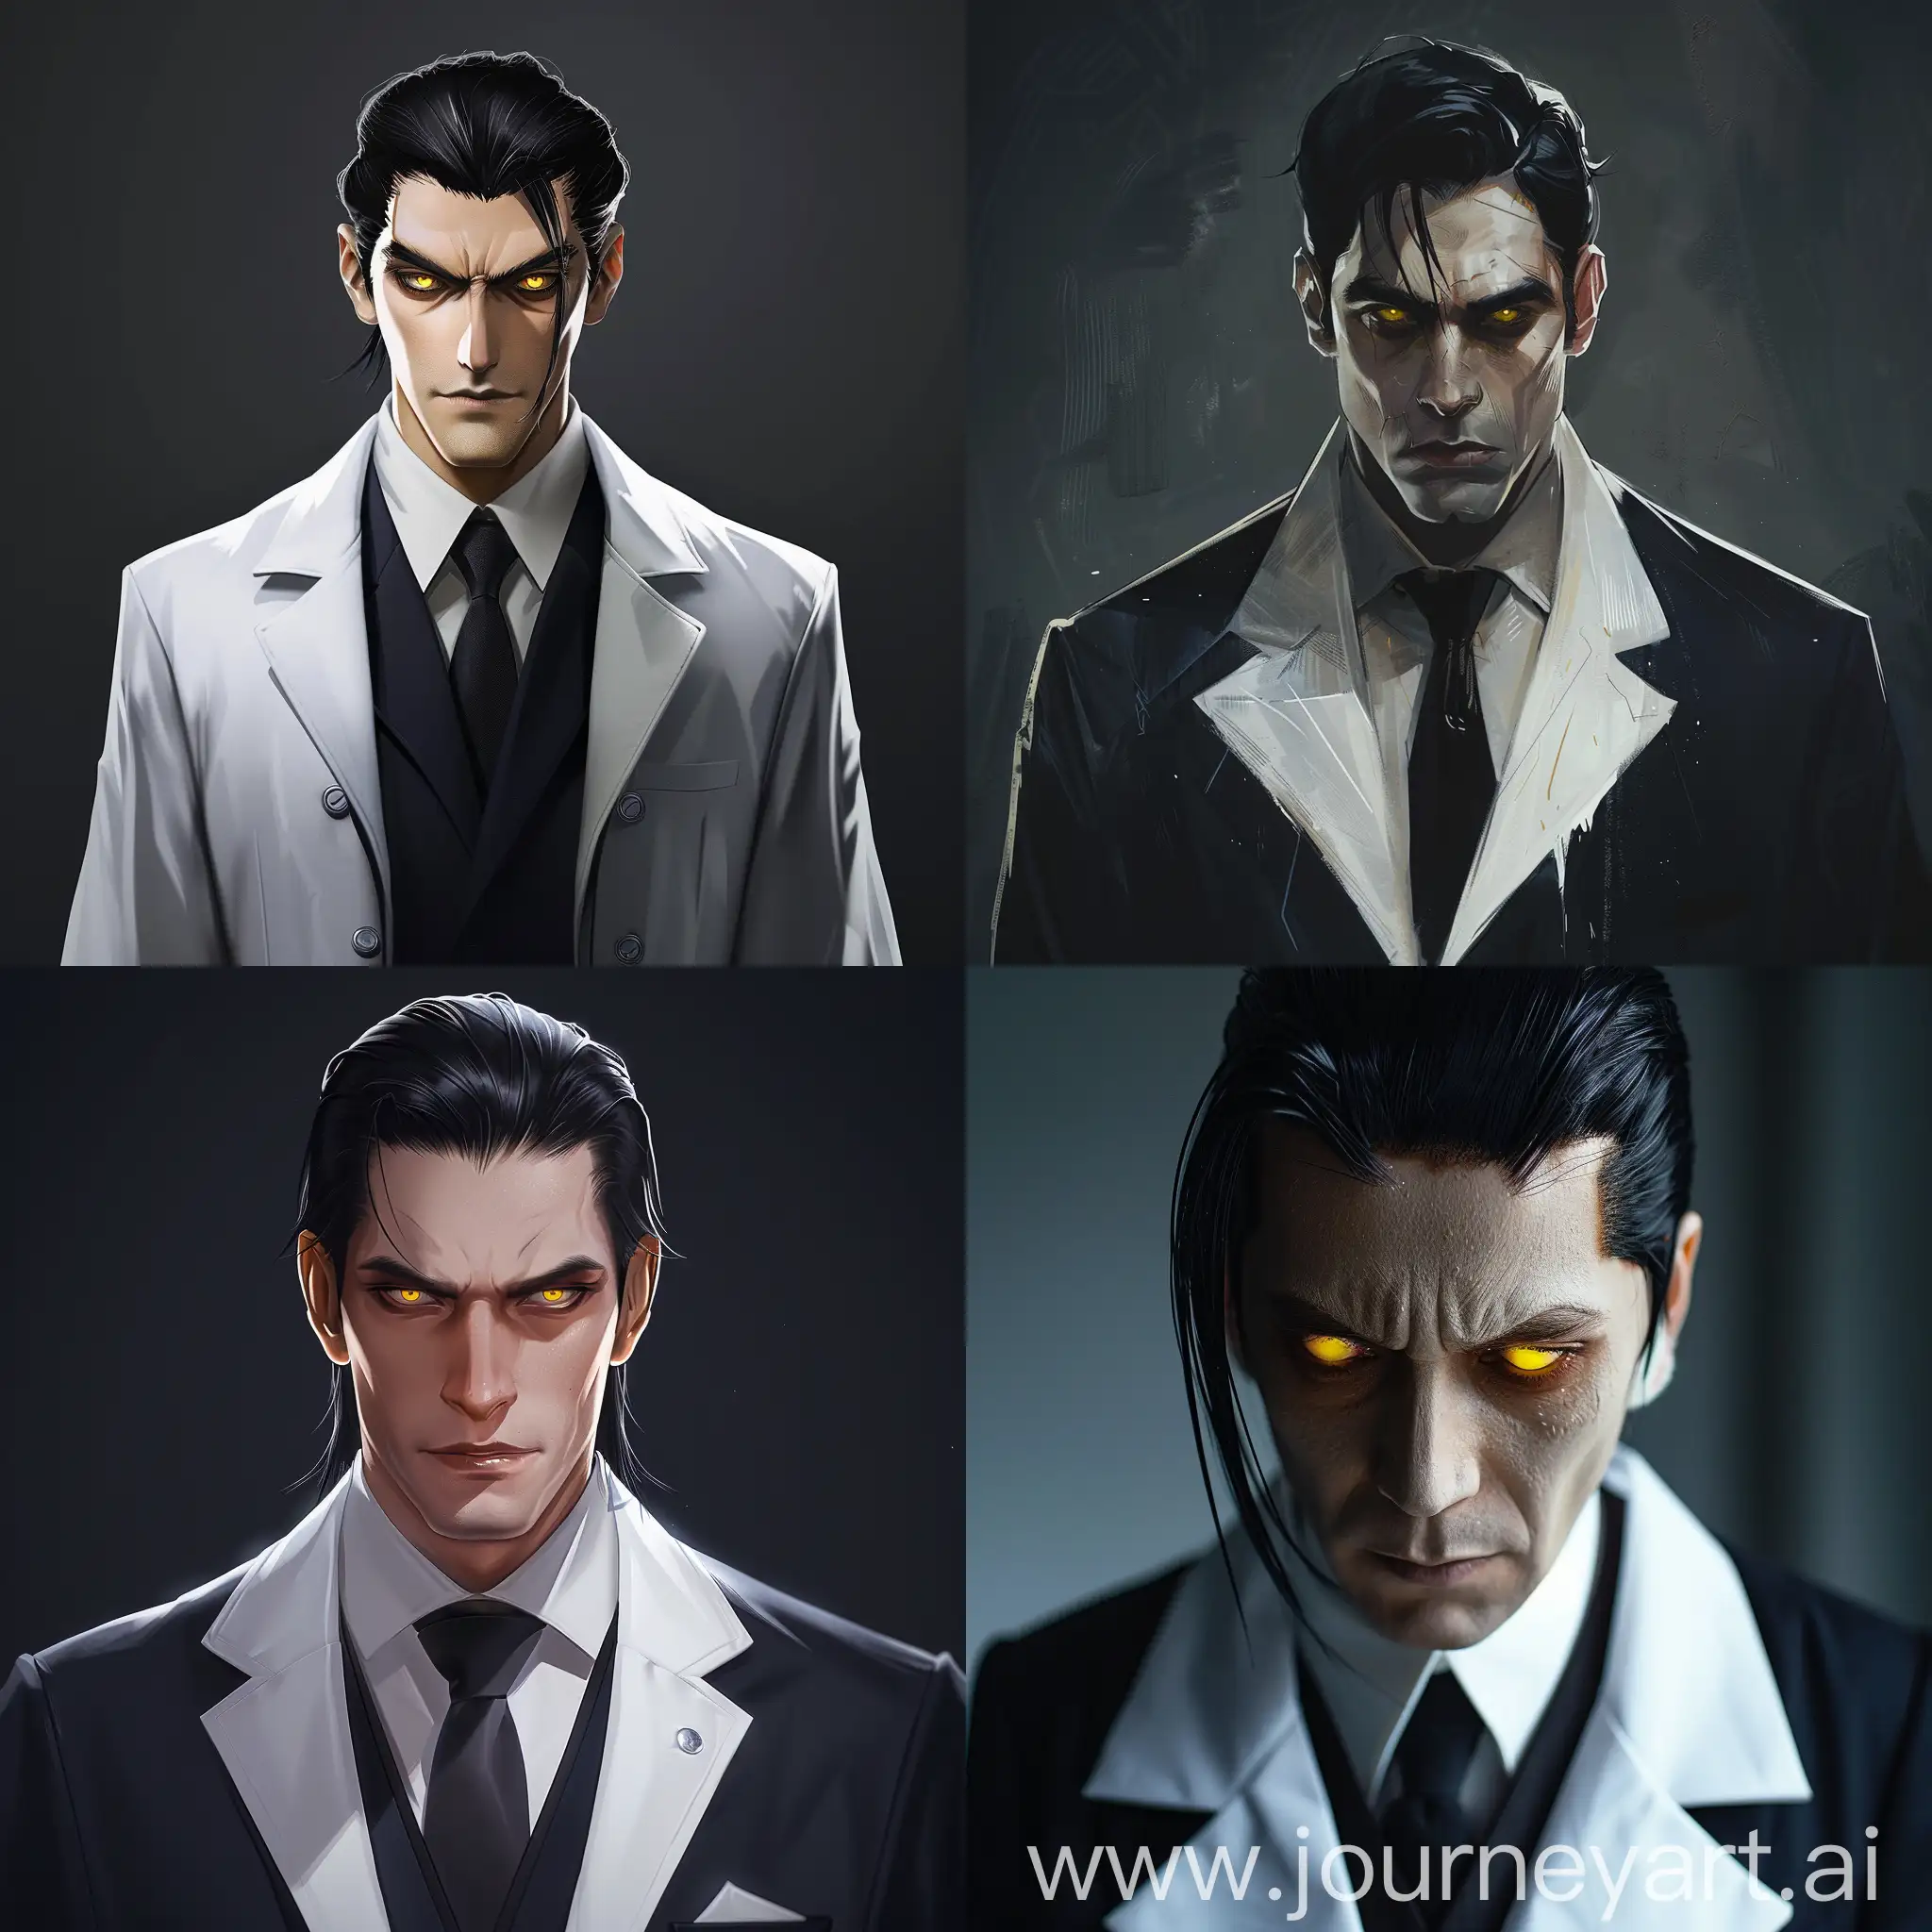 A serious man in dark suit and white lab coat, with black hair combed back and yellow eyes